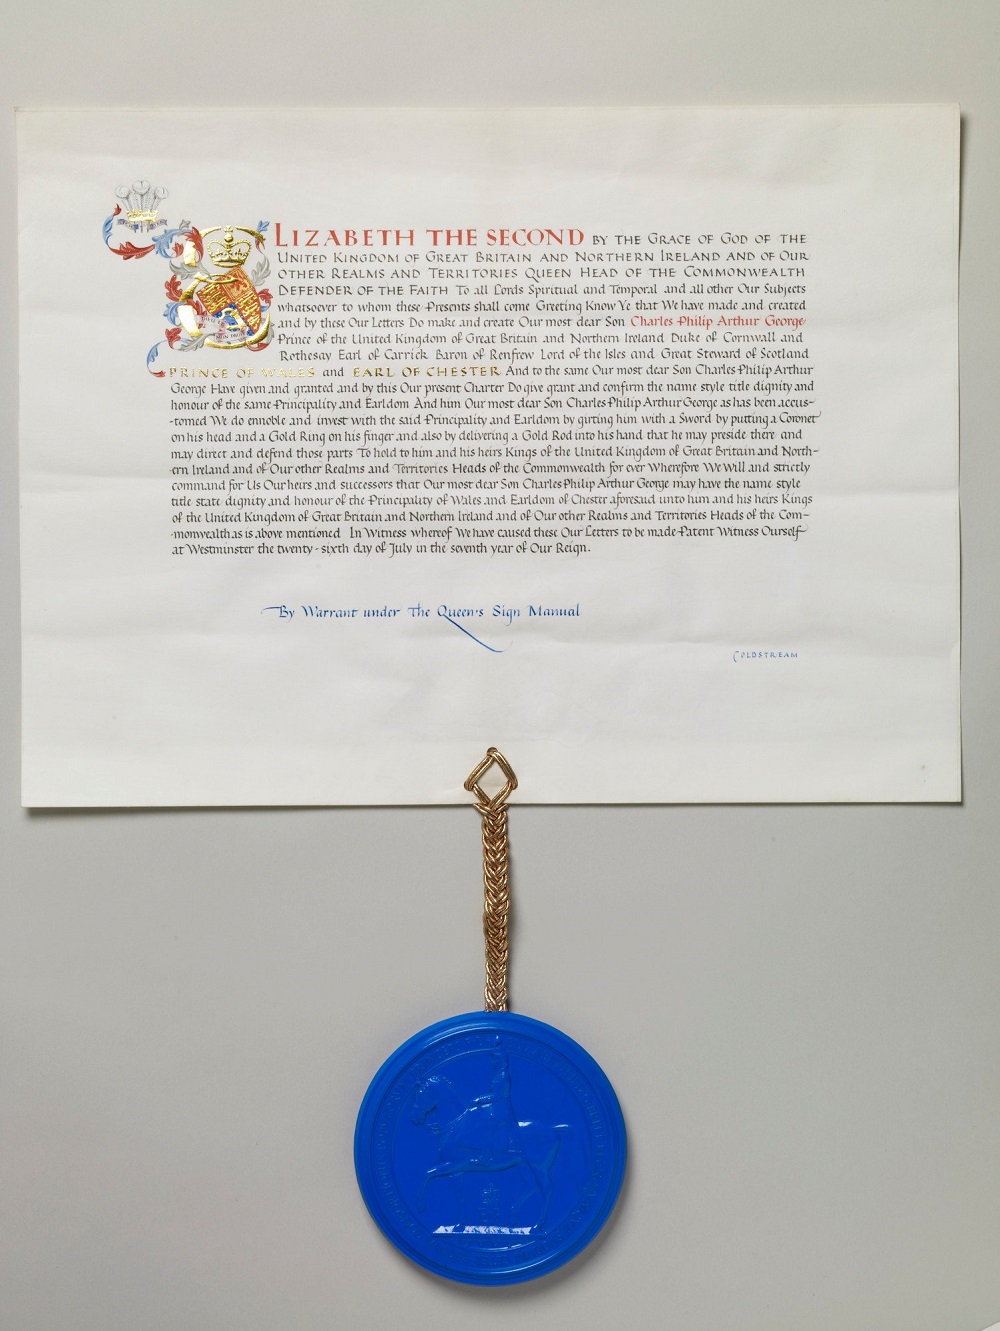 Prince of Wales and Earl of Chester letters patent